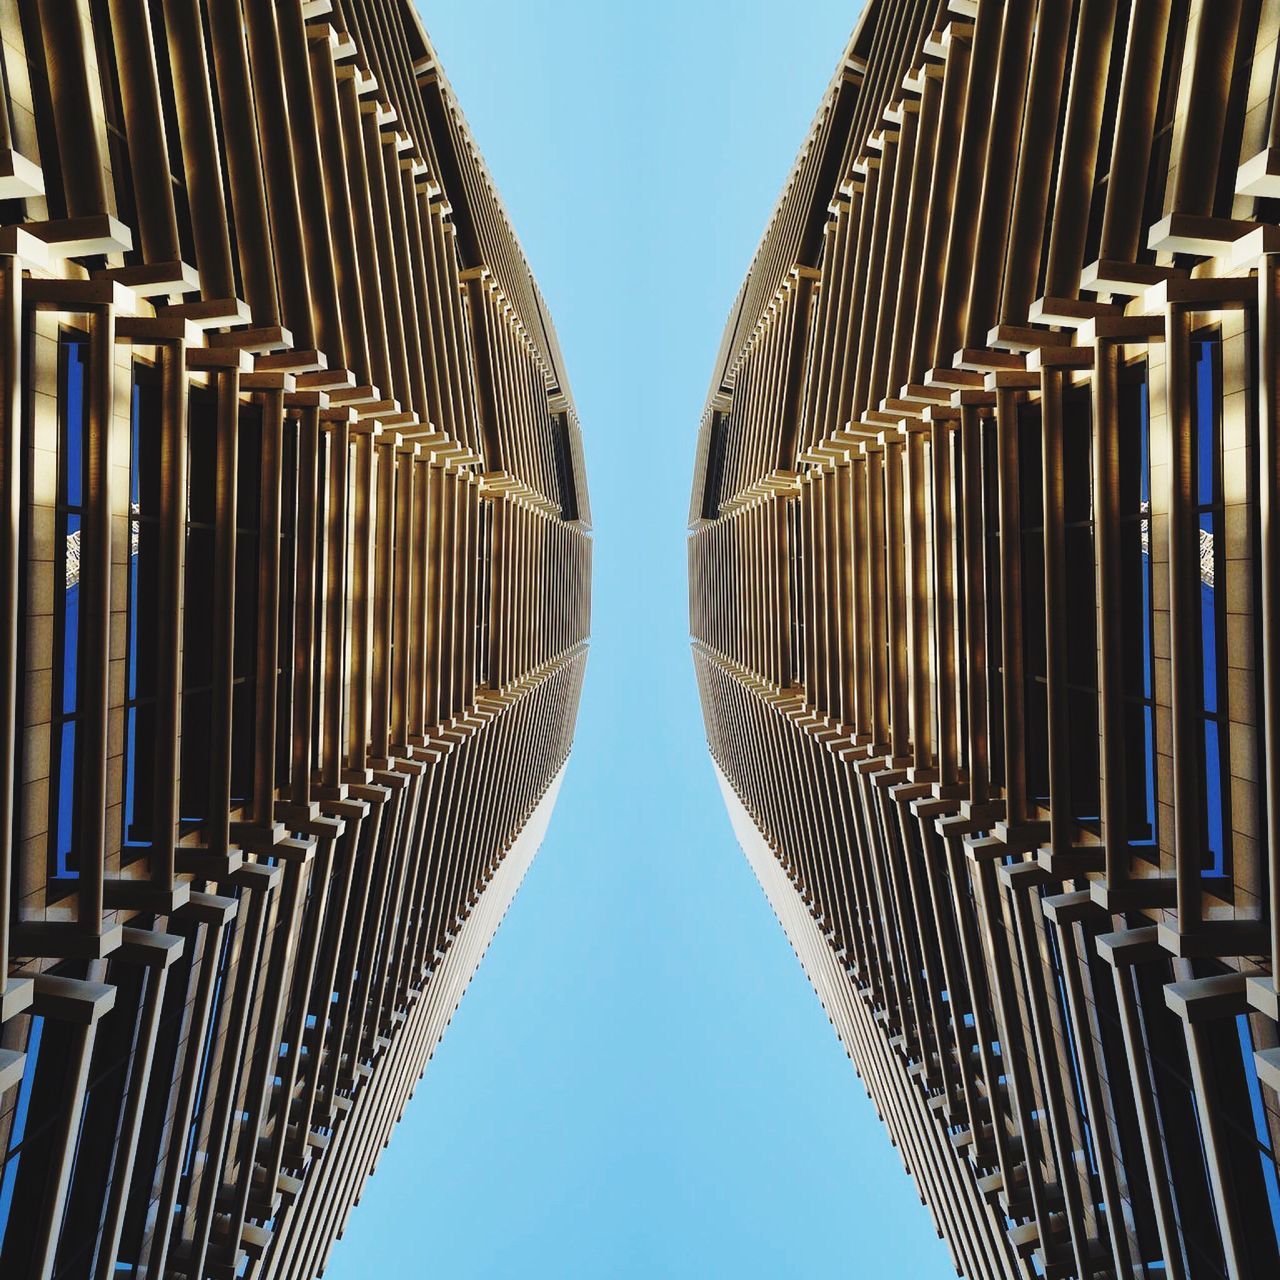 low angle view, architecture, built structure, clear sky, in a row, repetition, blue, building exterior, pattern, day, diminishing perspective, no people, outdoors, modern, tall - high, symmetry, building, sunlight, architectural column, travel destinations